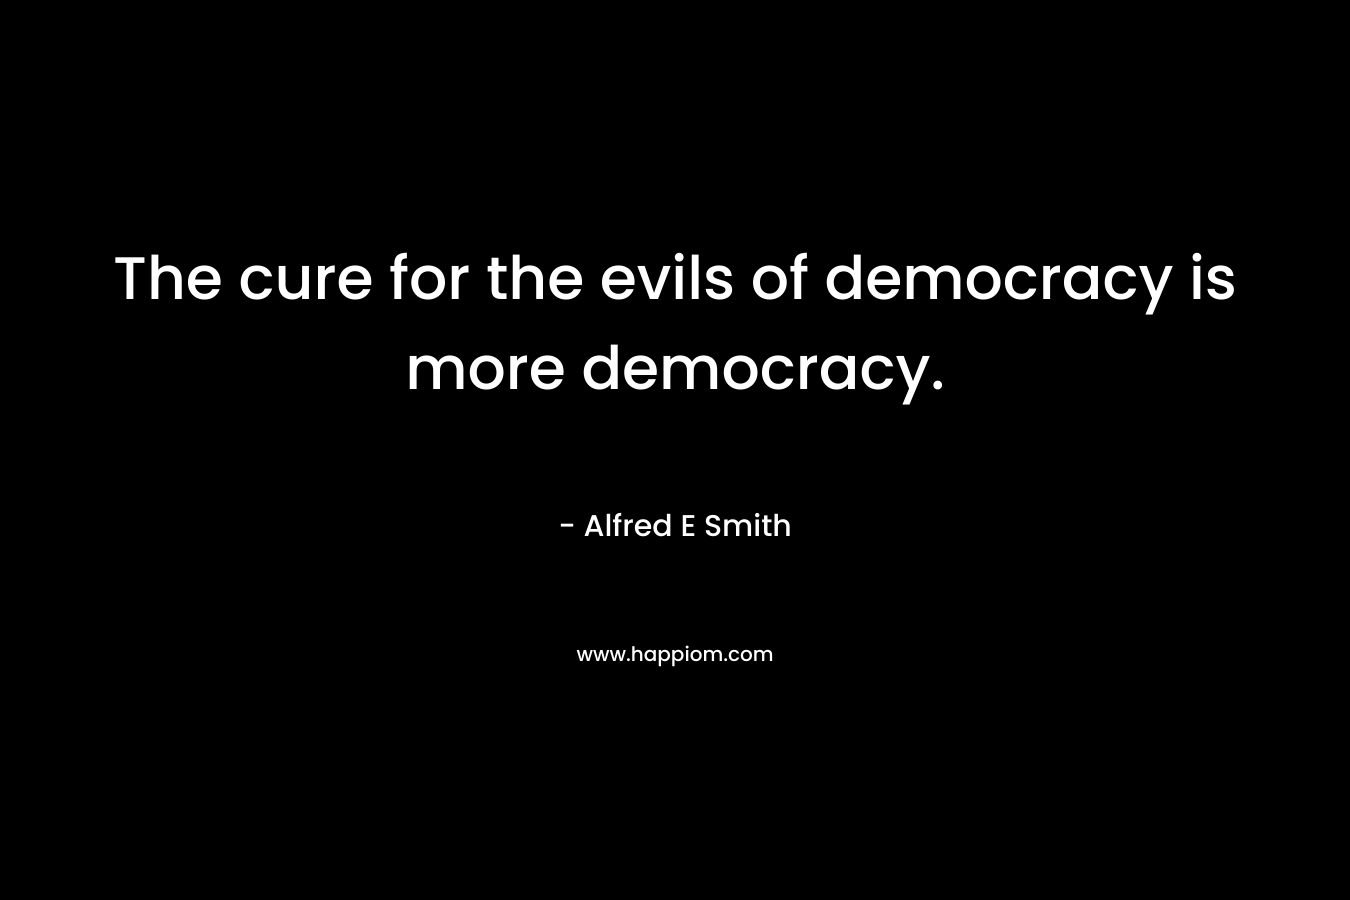 The cure for the evils of democracy is more democracy.